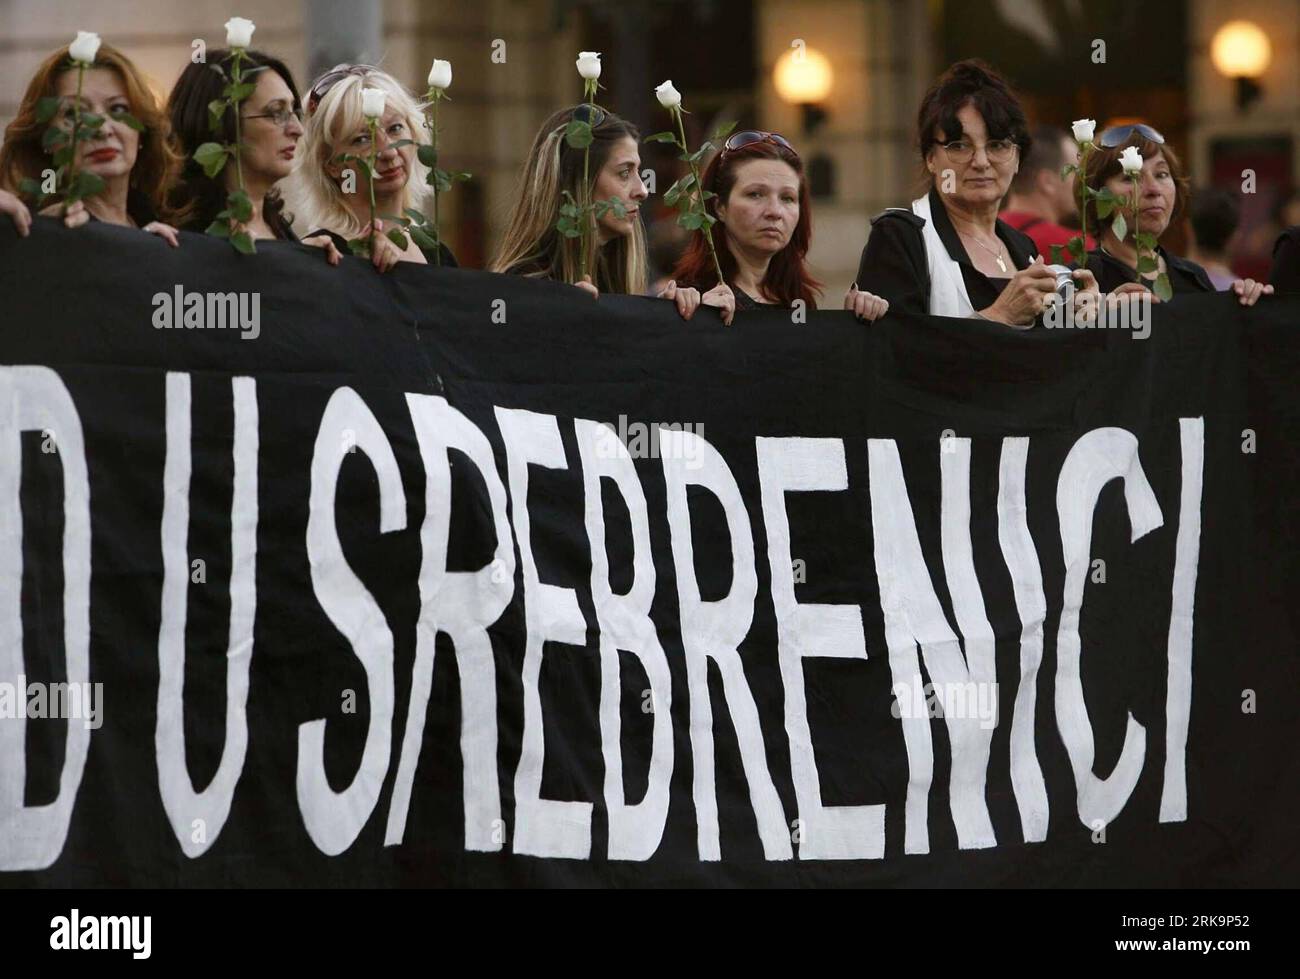 Bildnummer: 54220824  Datum: 10.07.2010  Copyright: imago/Xinhua (100710) -- BELGRADE, July 10, 2010 (Xinhua) -- Members of NGO Women in Black attend a protest in Belgrade, Serbia, July 10, 2010, on the eve of the 15th anniversary of the Srebrenica massacre in 1995 to raise public awareness of the war crimes. In July 1995, more than 8,000 Bosnian Muslim men and boys were massacred in Srebrenica by Bosnian Serb forces and a paramilitary unit from Serbia. The Srebrenica massacre is the largest mass murder in Europe since World War II. (Xinhua/Beta)(Serbia Out) (zw) (3)SERBIA-BELGRADE-PROTEST-SRE Stock Photo